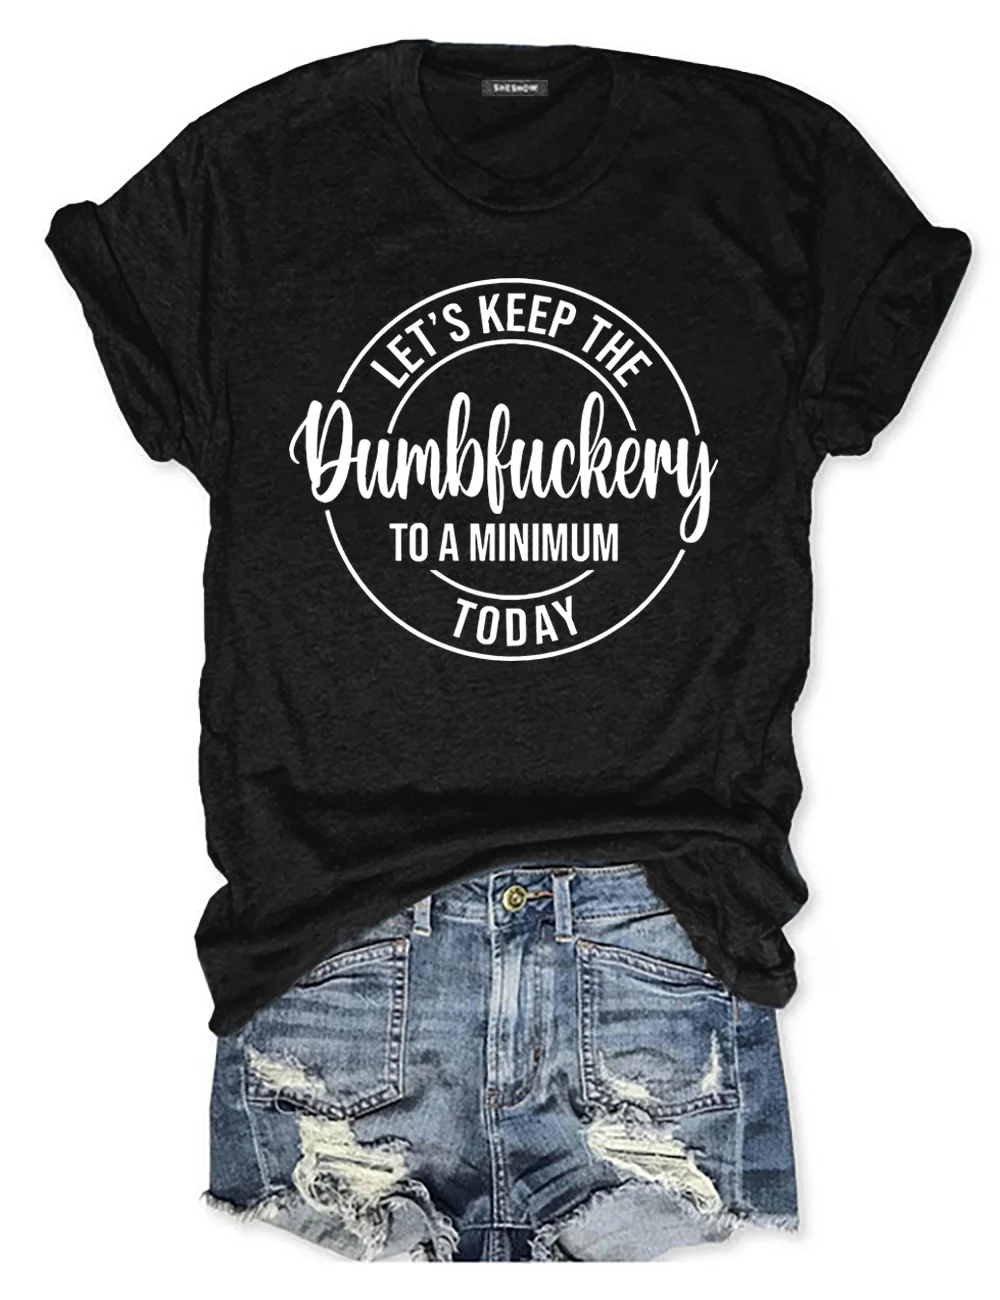 Let’s Keep The Dumbfuckery To A Minimum Today T-shirt